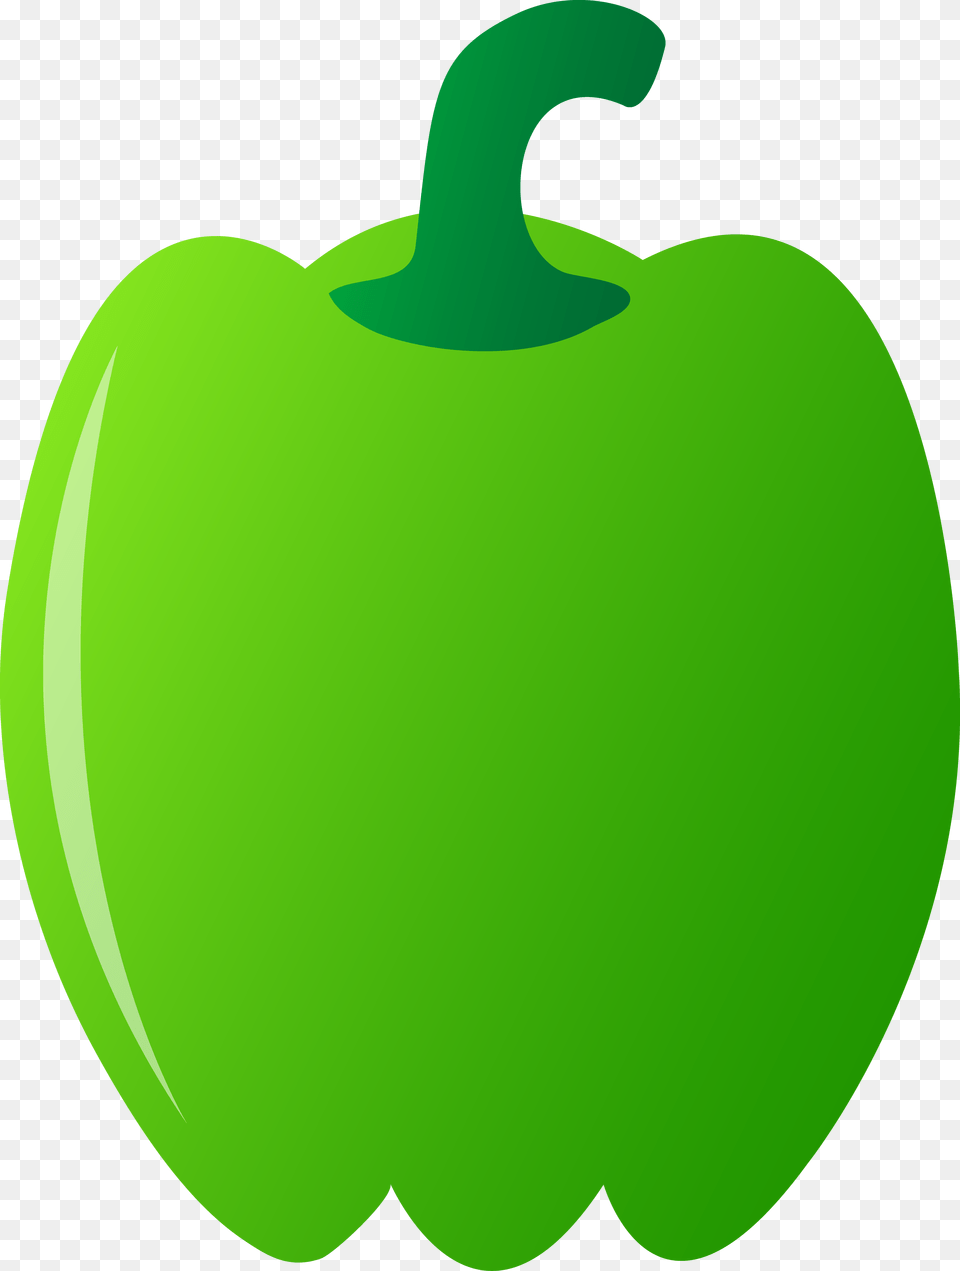 Green Bell Pepper, Bell Pepper, Food, Plant, Produce Png Image